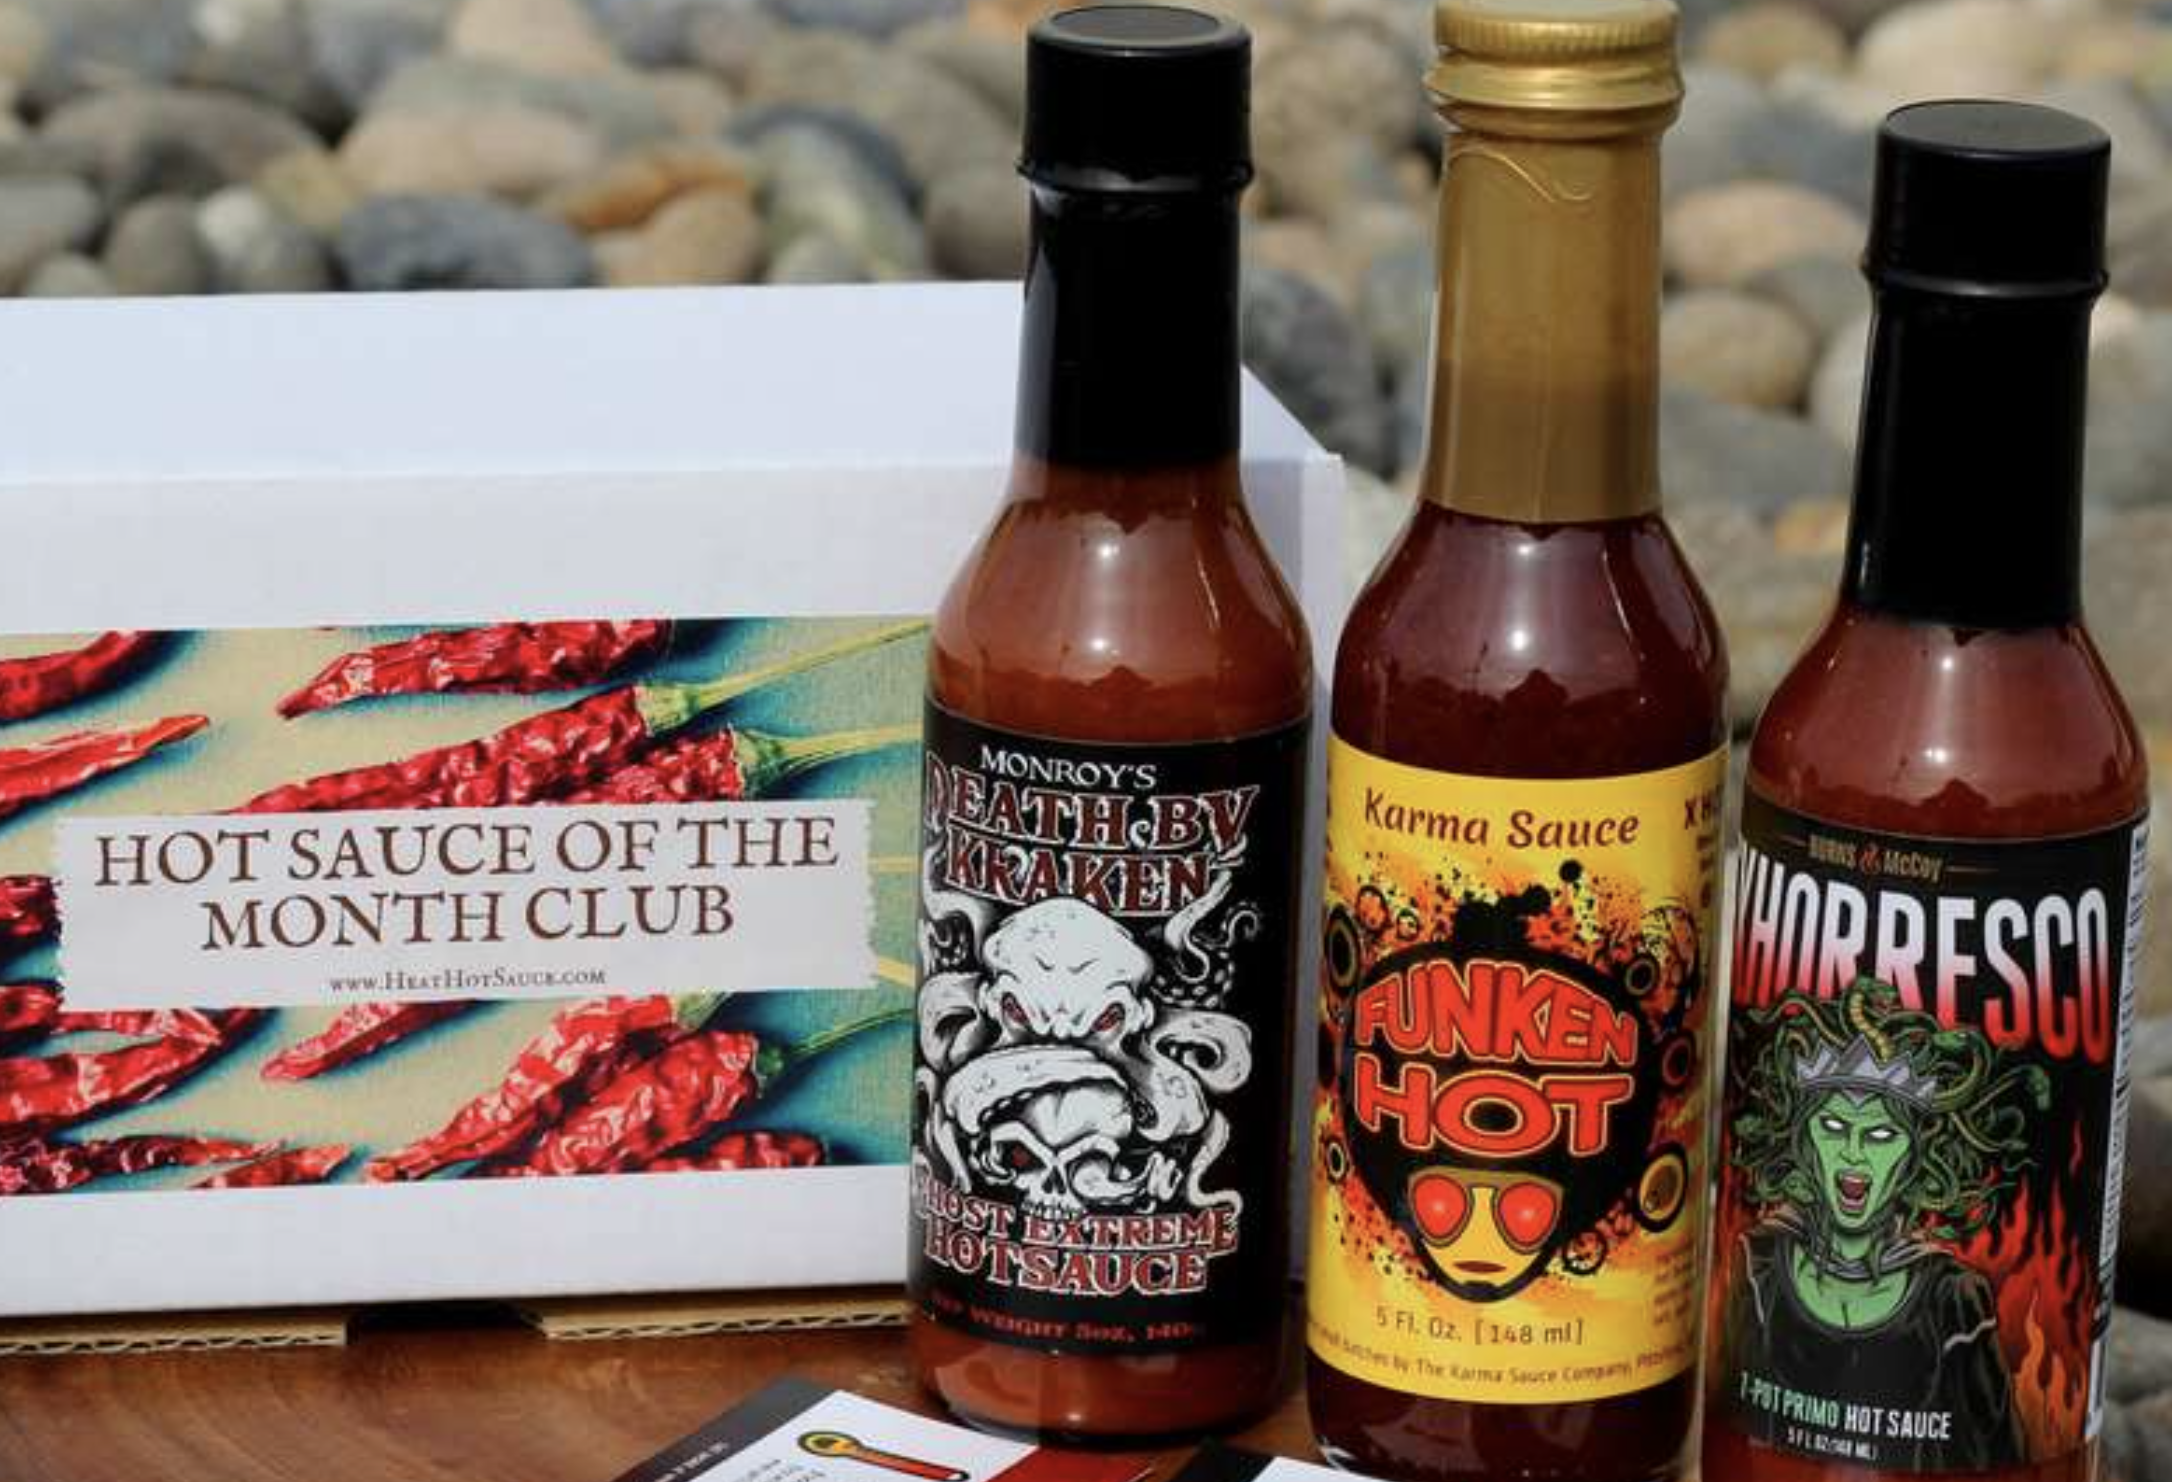 Three hot sauce bottles with colorful, quirky labels sit next to a hot sauce of the month club box with chile peppers on it